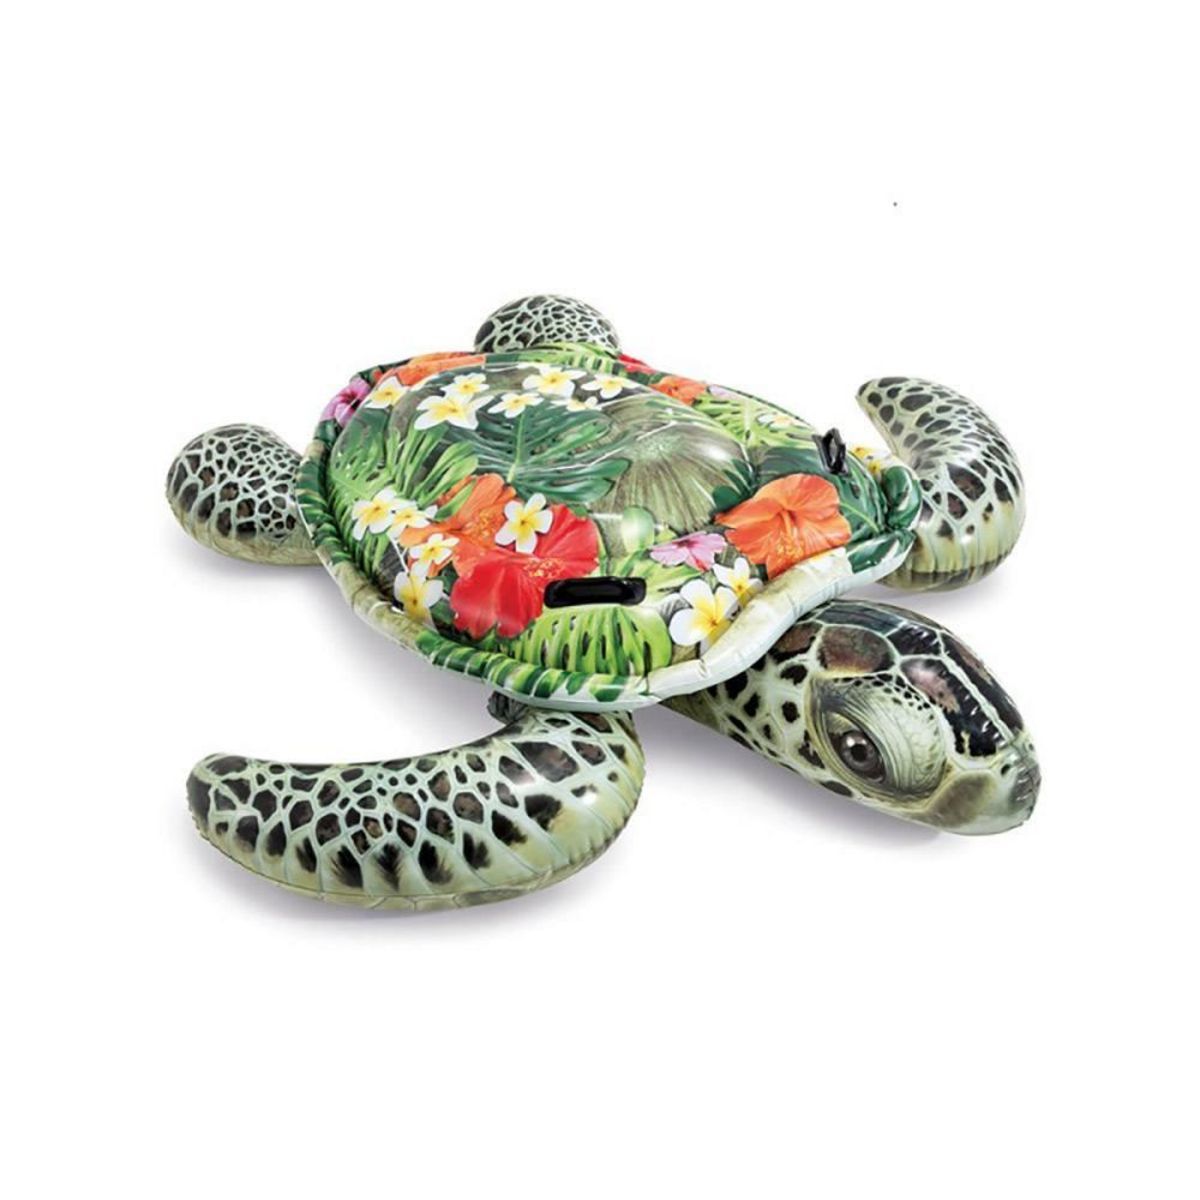 TORTUE CHEVAUCHABLE